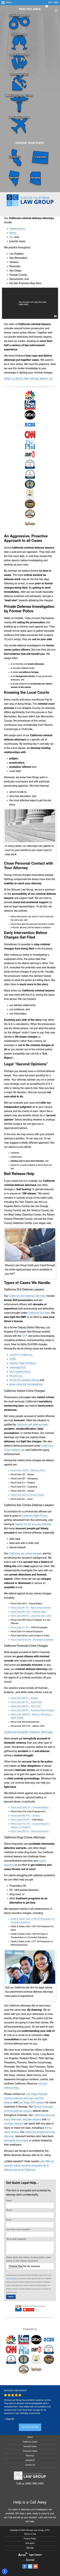 Shouse Law Group - Riverside CA Lawyers